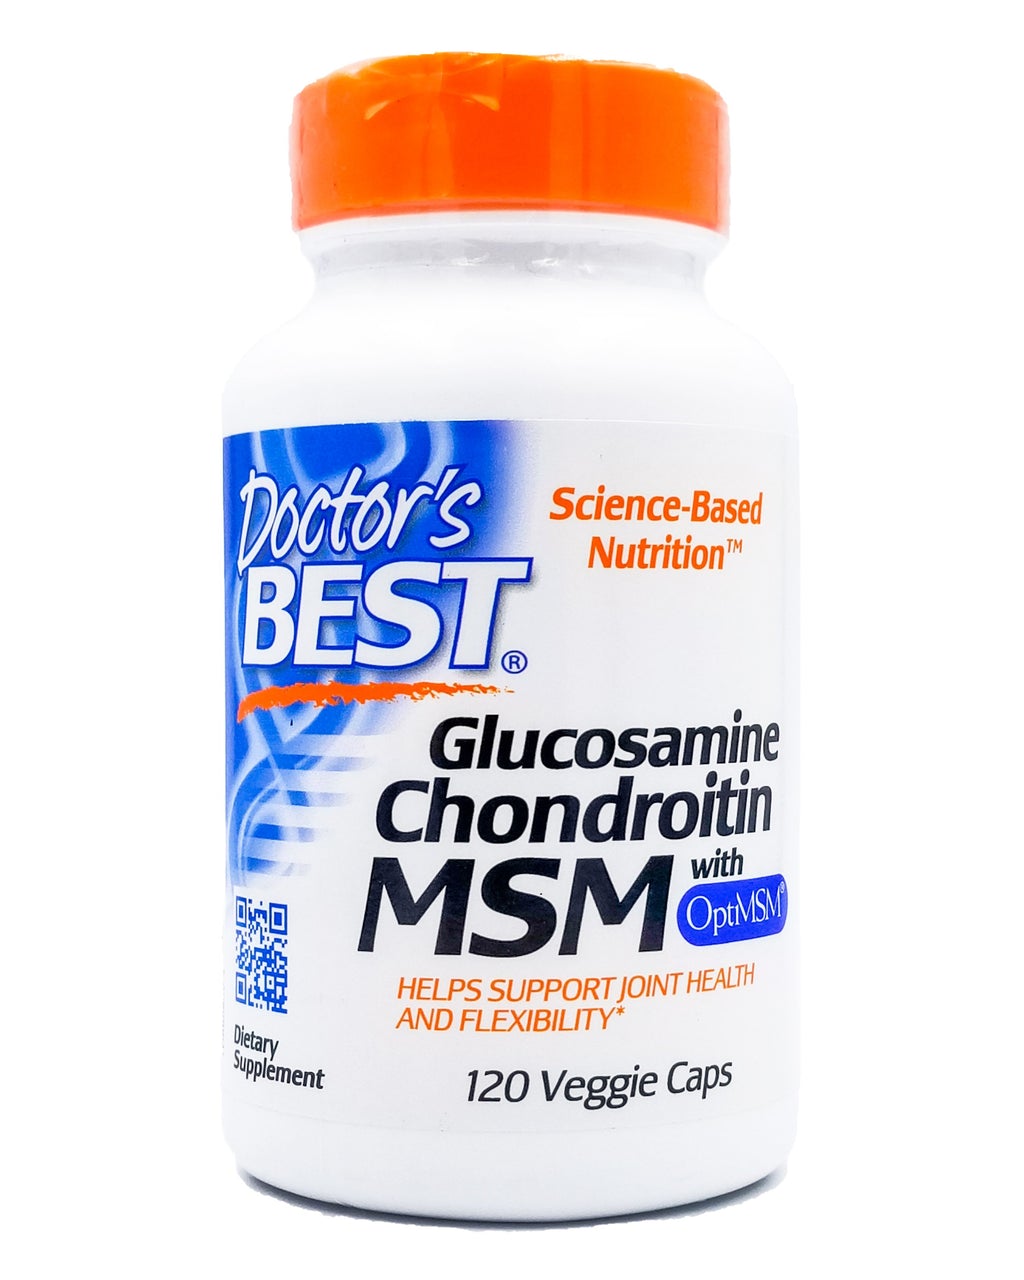 Container of tablets, doctor's best, science-based nutrition Glucosamine Chondroitin MSM, 120 veggie caps